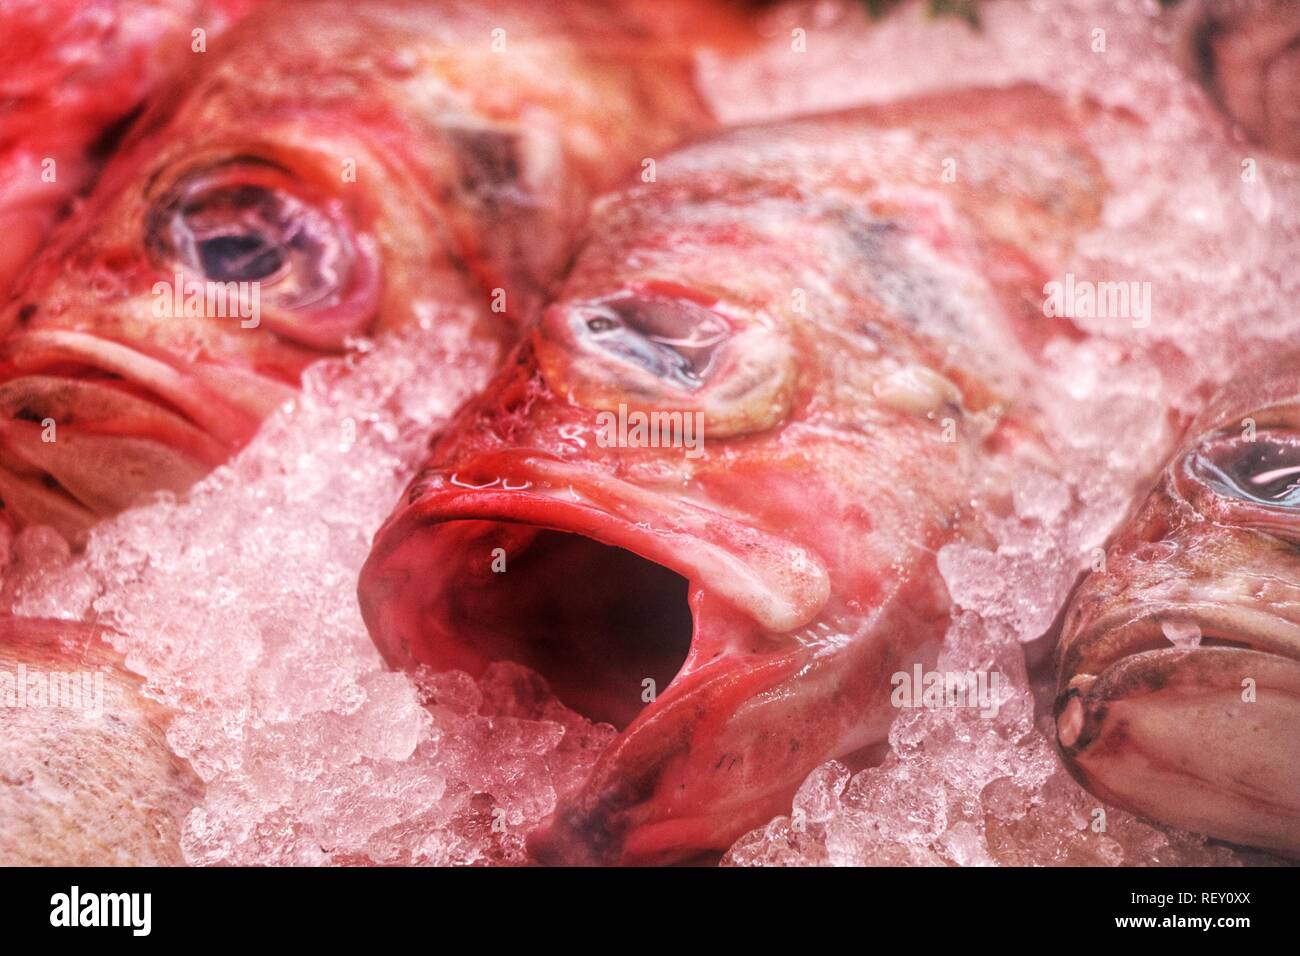 A sad looking red mullet on ice Stock Photo